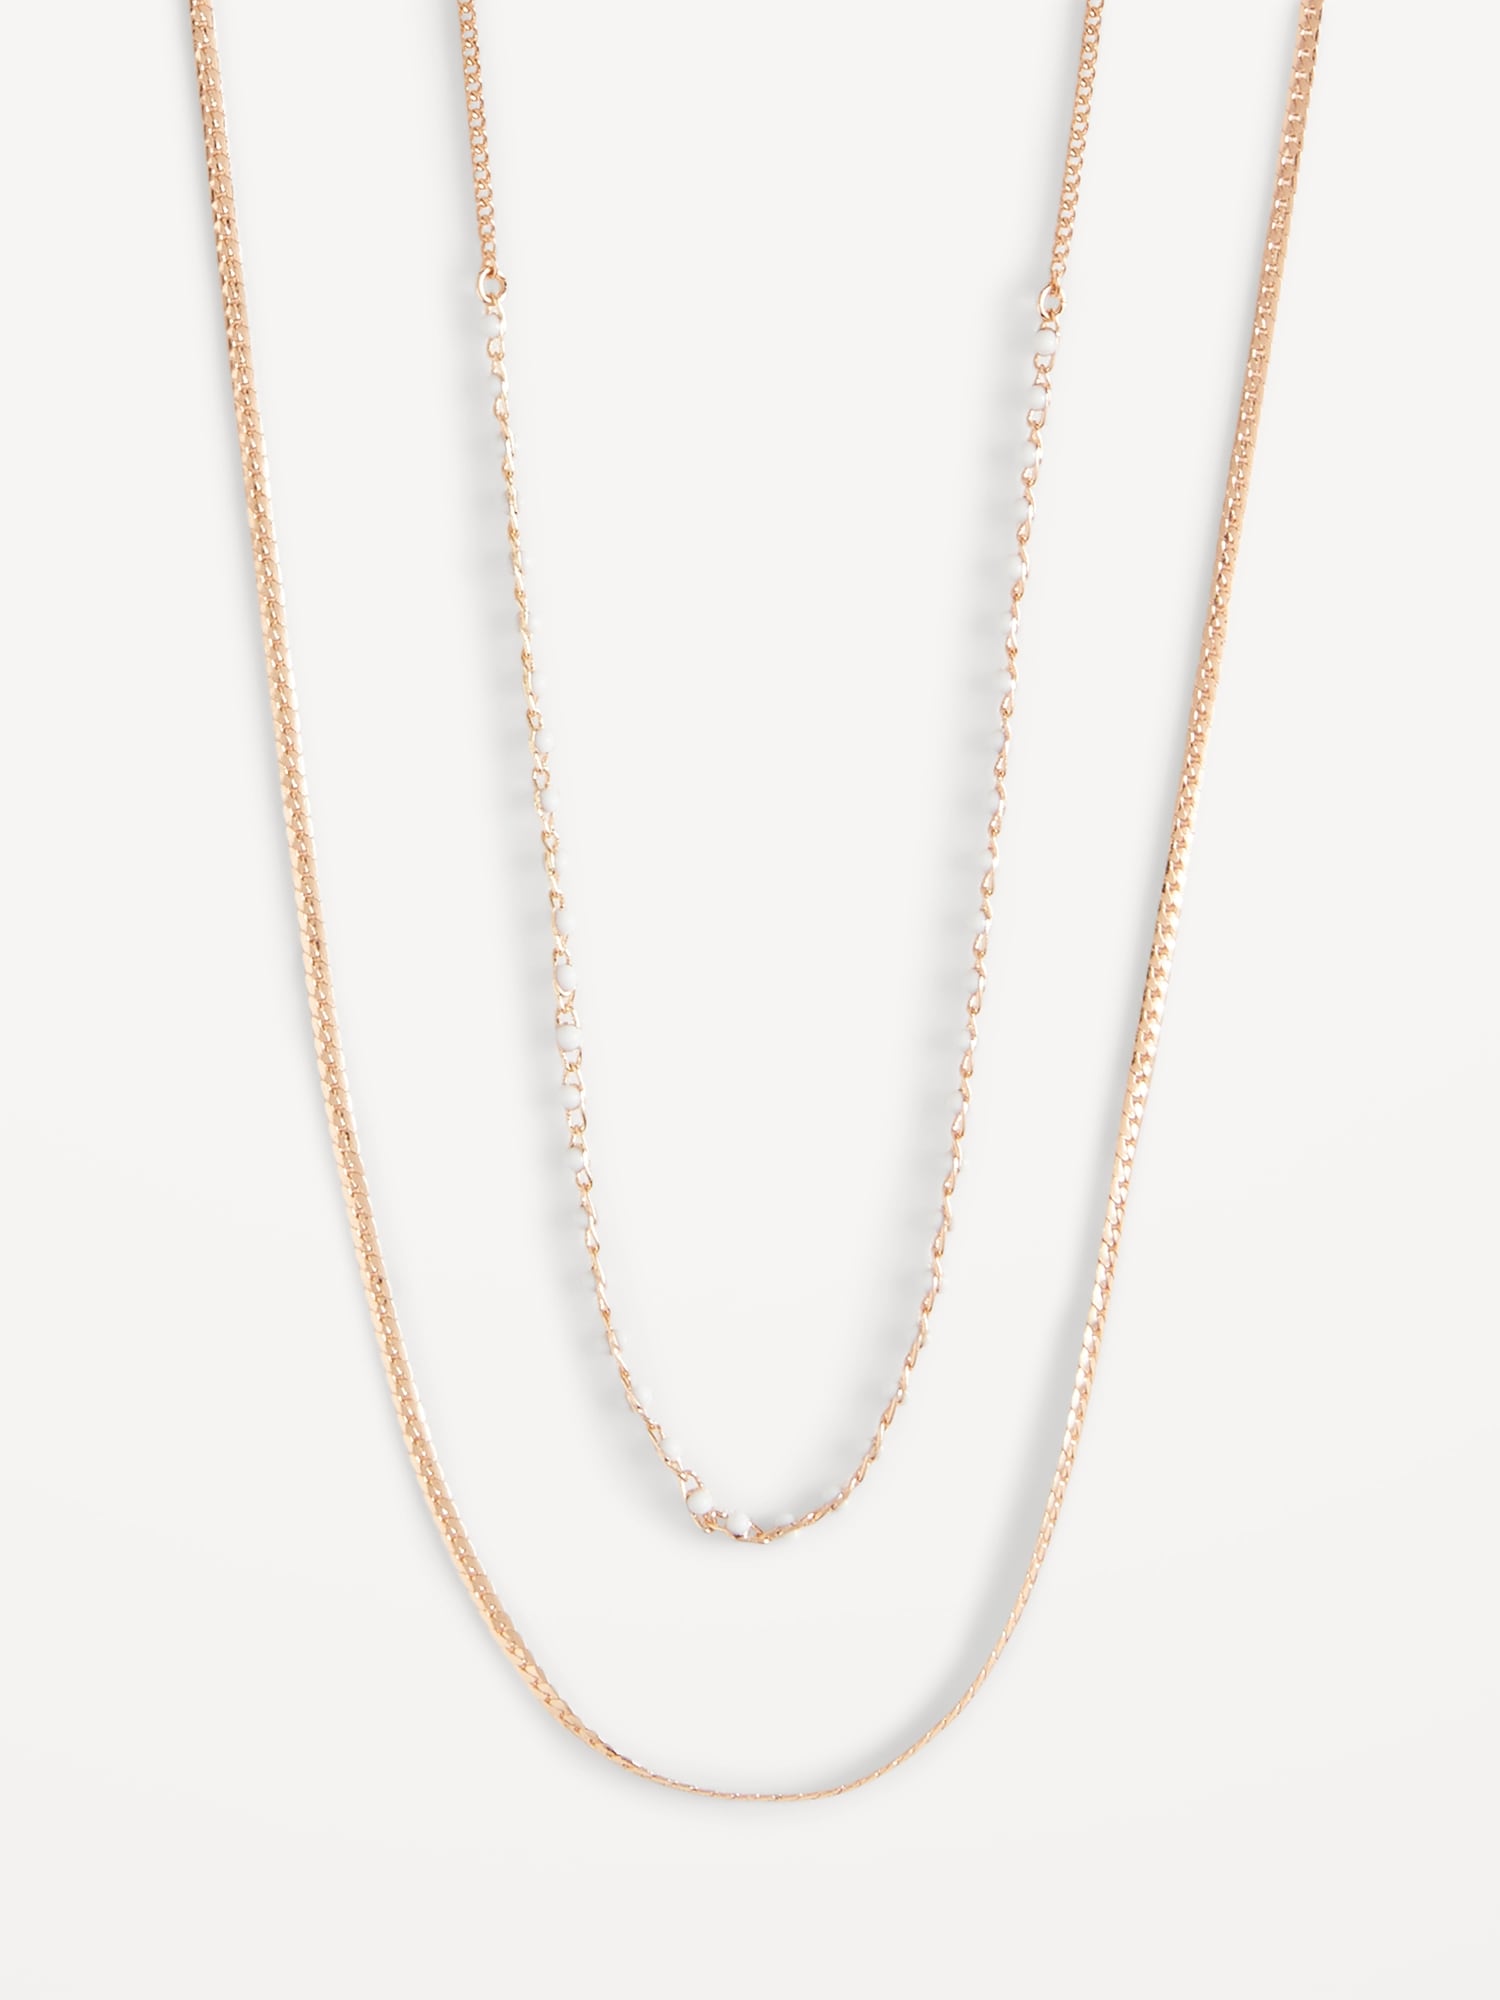 Old Navy Gold-Plated Chain Necklace Variety 2-Pack for Women gold. 1